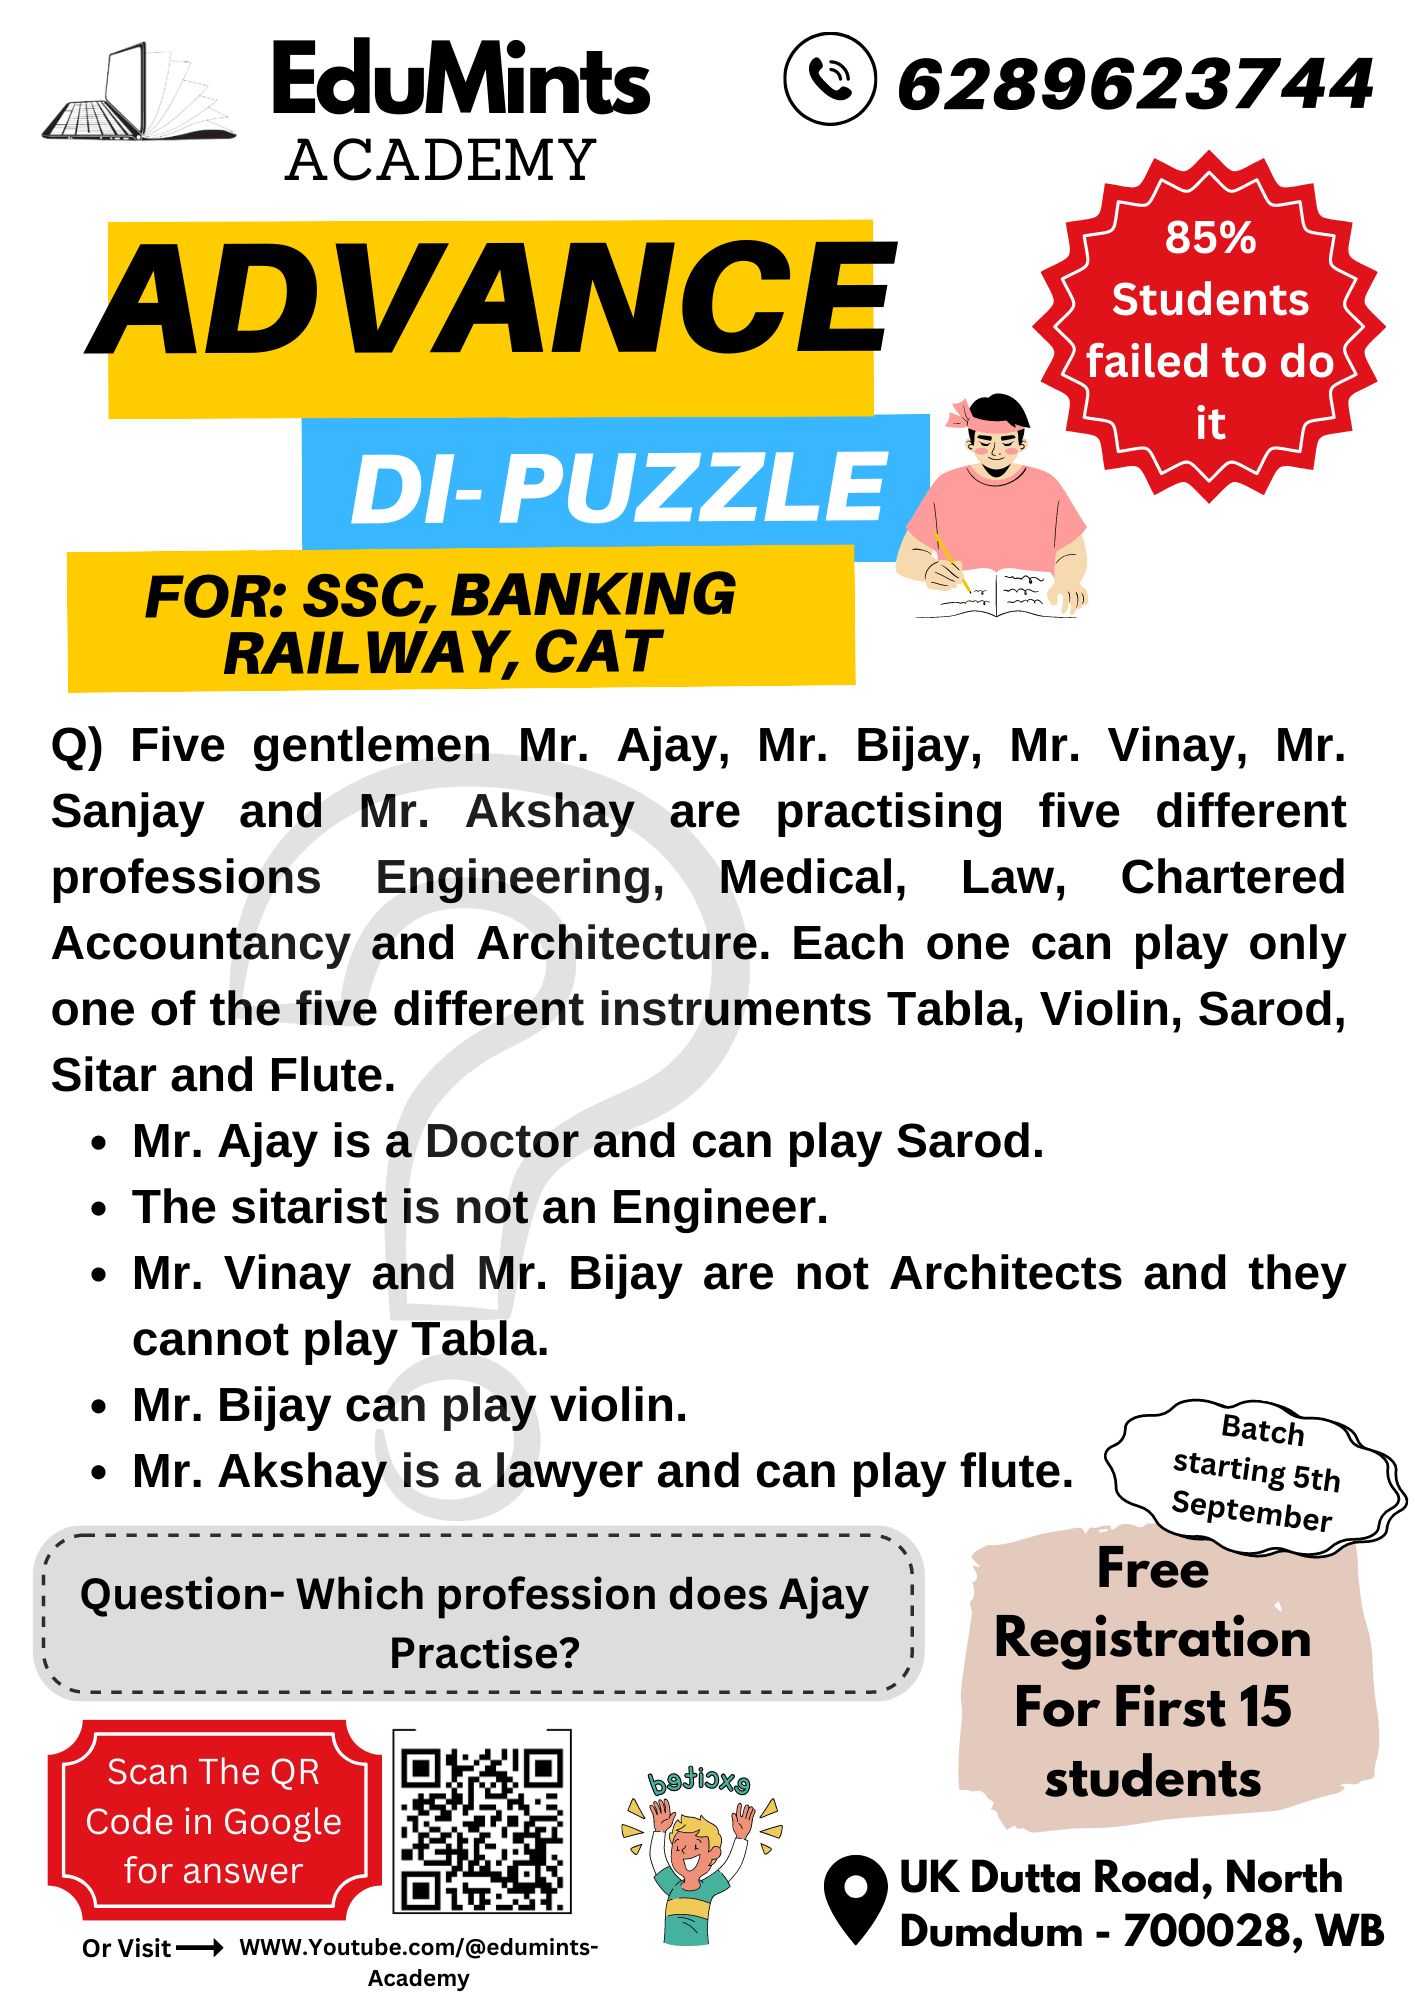 Edumints offer coaching for SSC, BANKING, RAILWAY and other government exams along with CAT, XAT, SNAP and other management exams